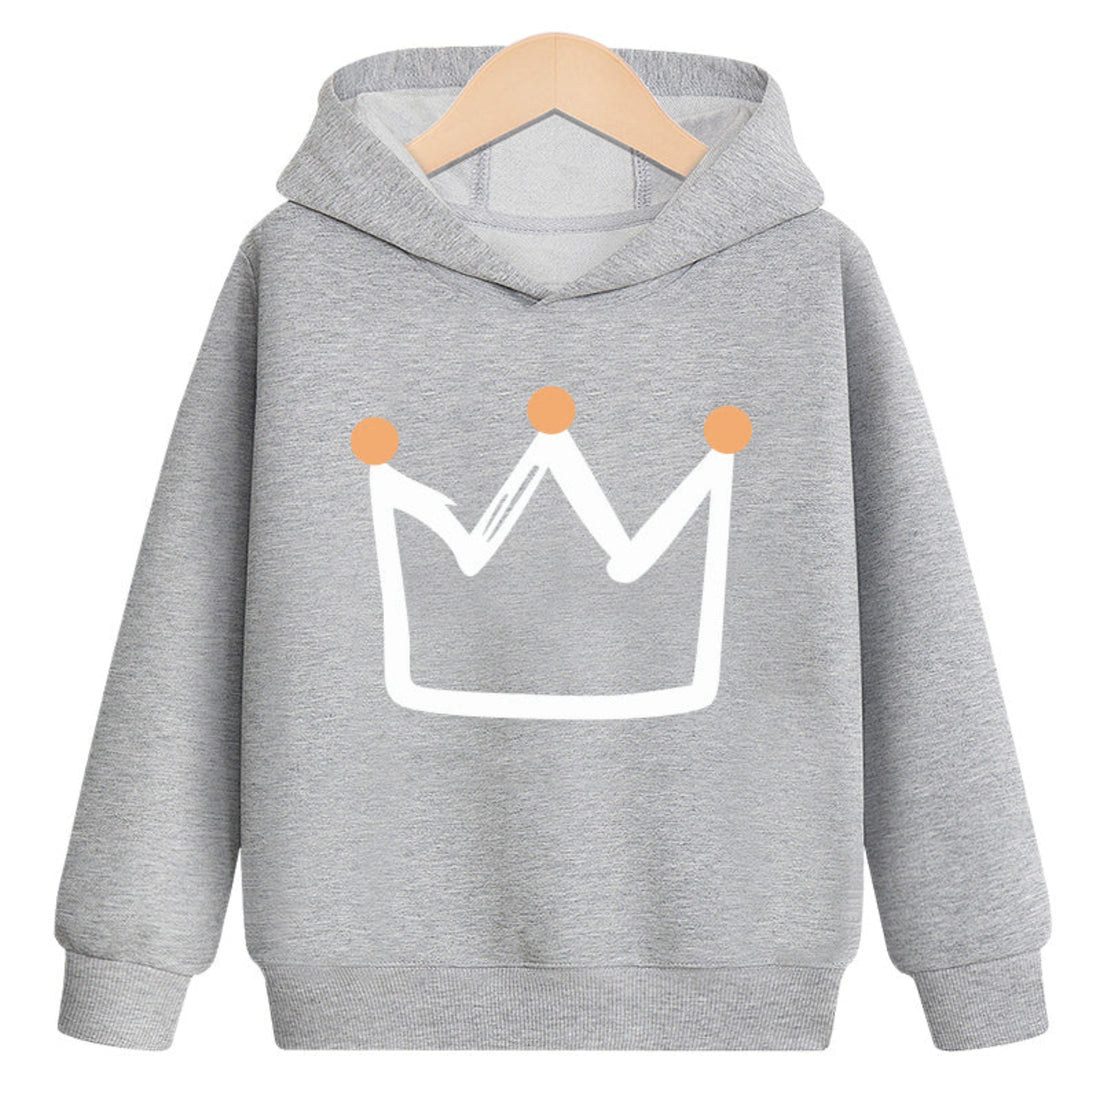 Unisex children's velvet hoodie featuring a crown design for added style and warmth.